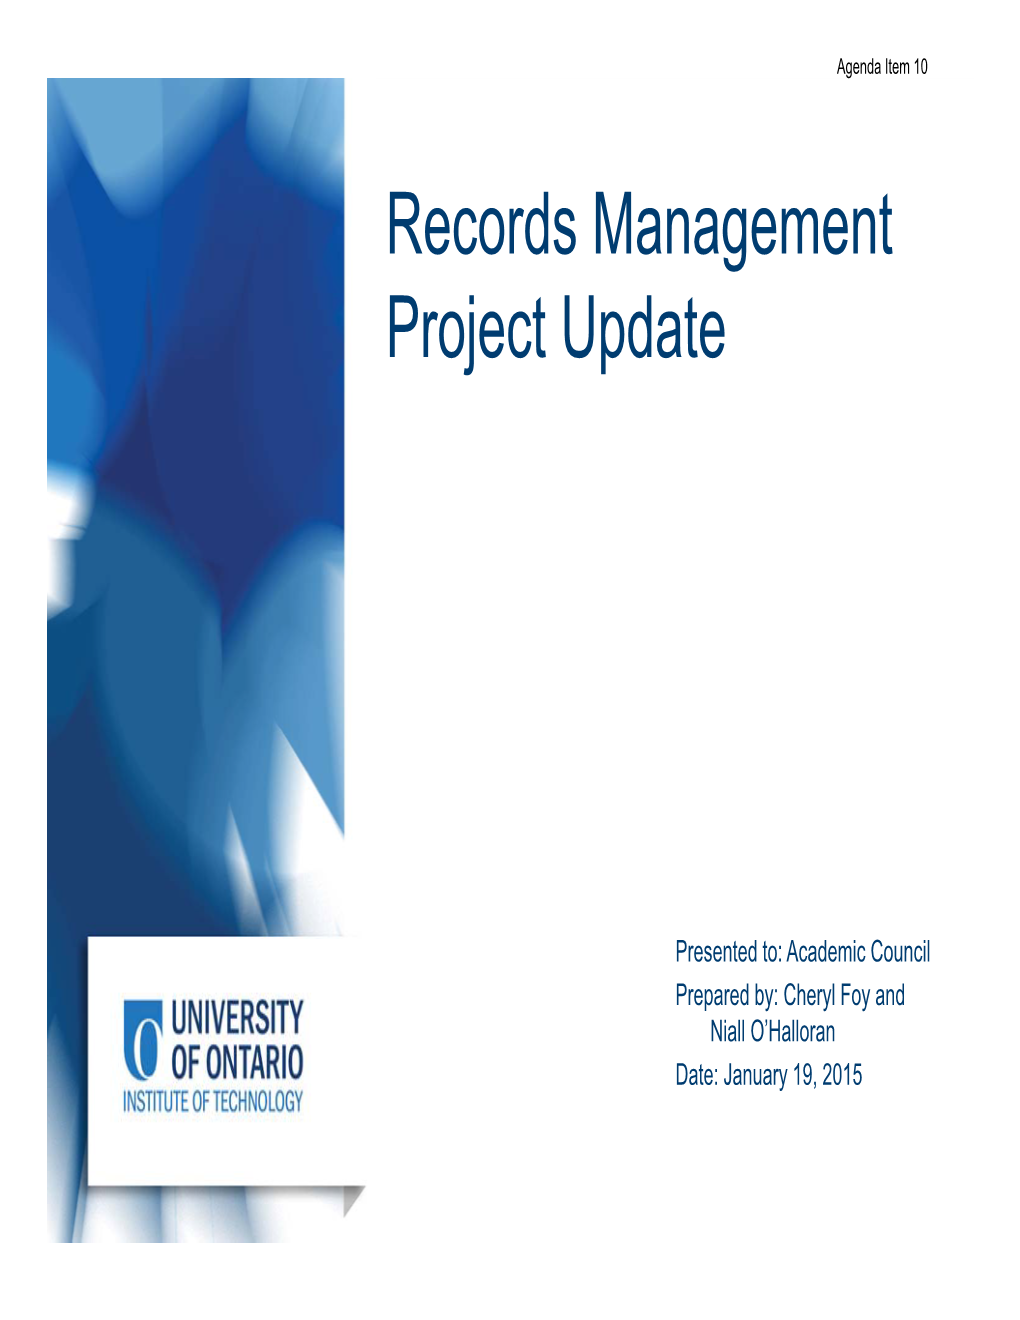 Records Management Project Update